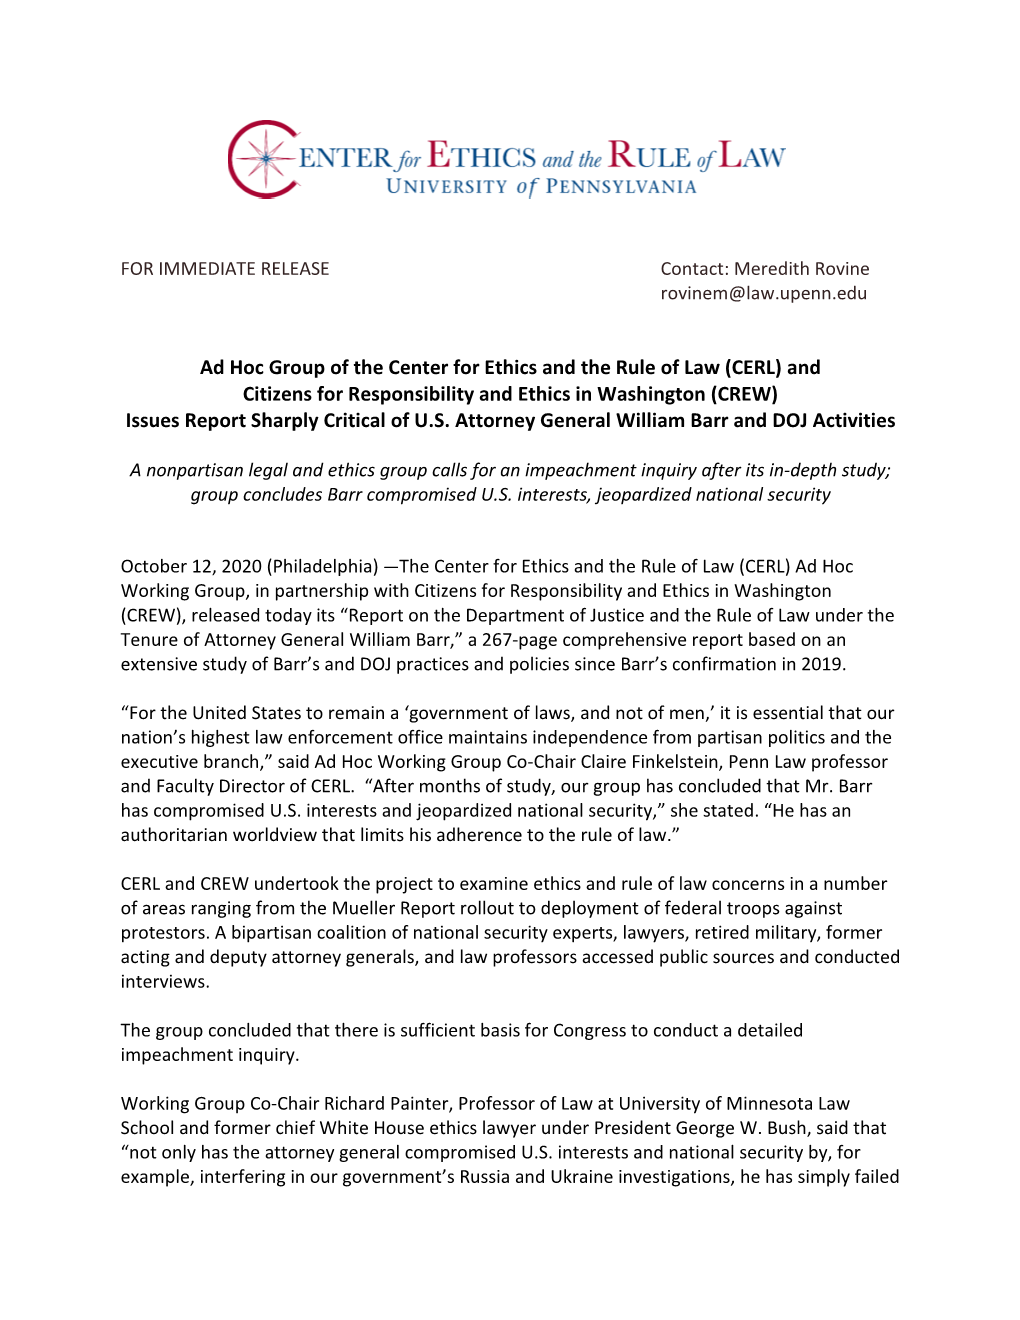 Ad Hoc Group of the Center for Ethics and the Rule of Law (CERL) and Citizens for Responsibility and Ethics in Washington (CREW) Issues Report Sharply Critical of U.S